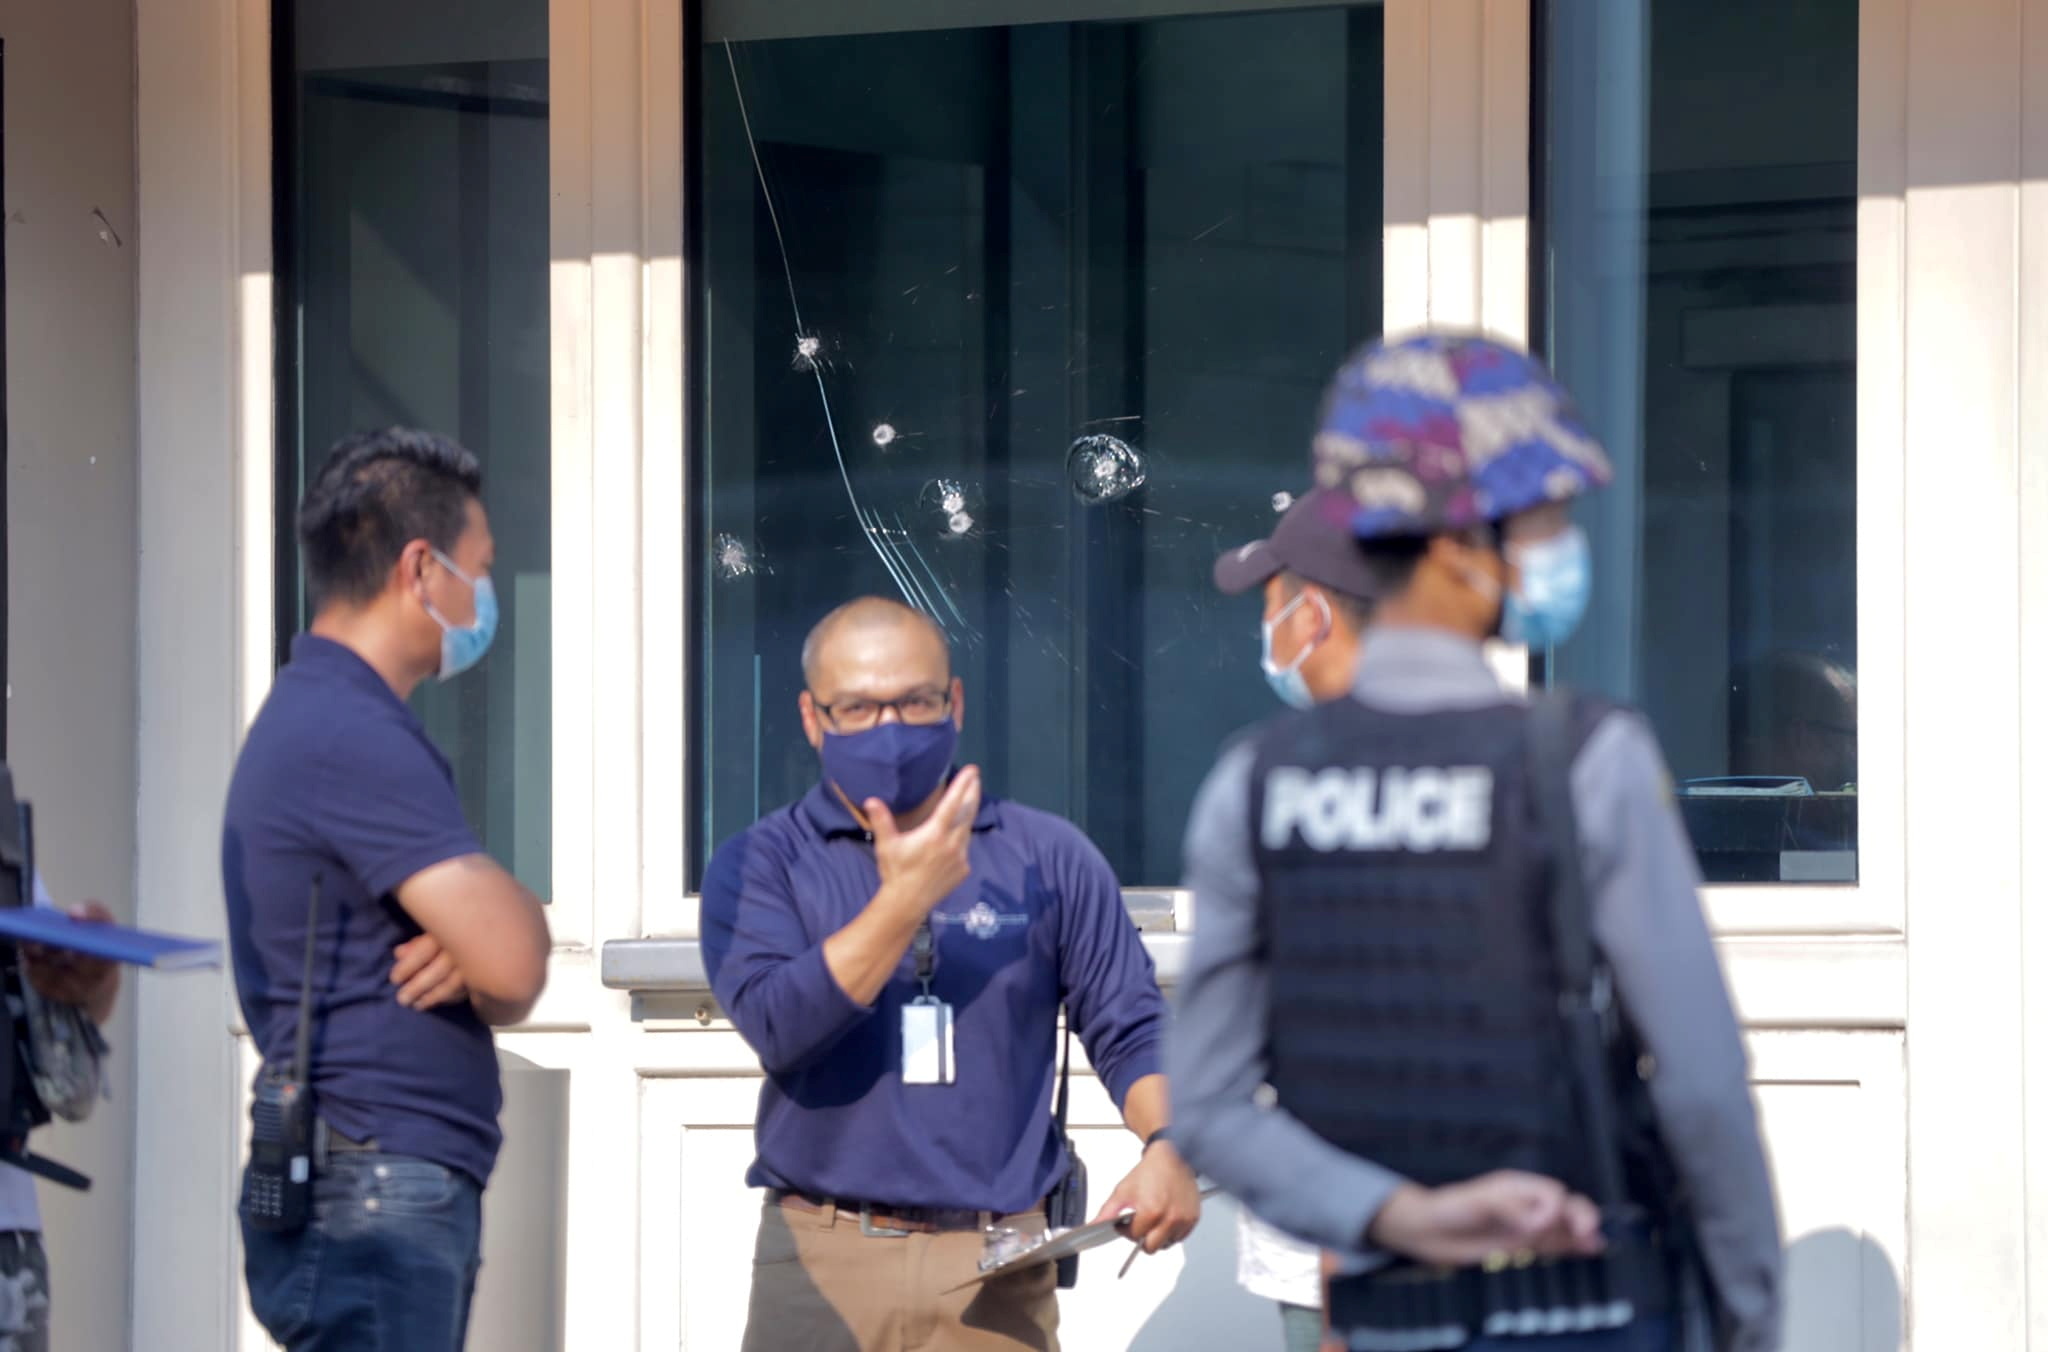 Bullet holes are seen on the window at American Center Yangon (ACY) in Yangon, Myanmar March 27, 2021 in this picture obtained by REUTERS 